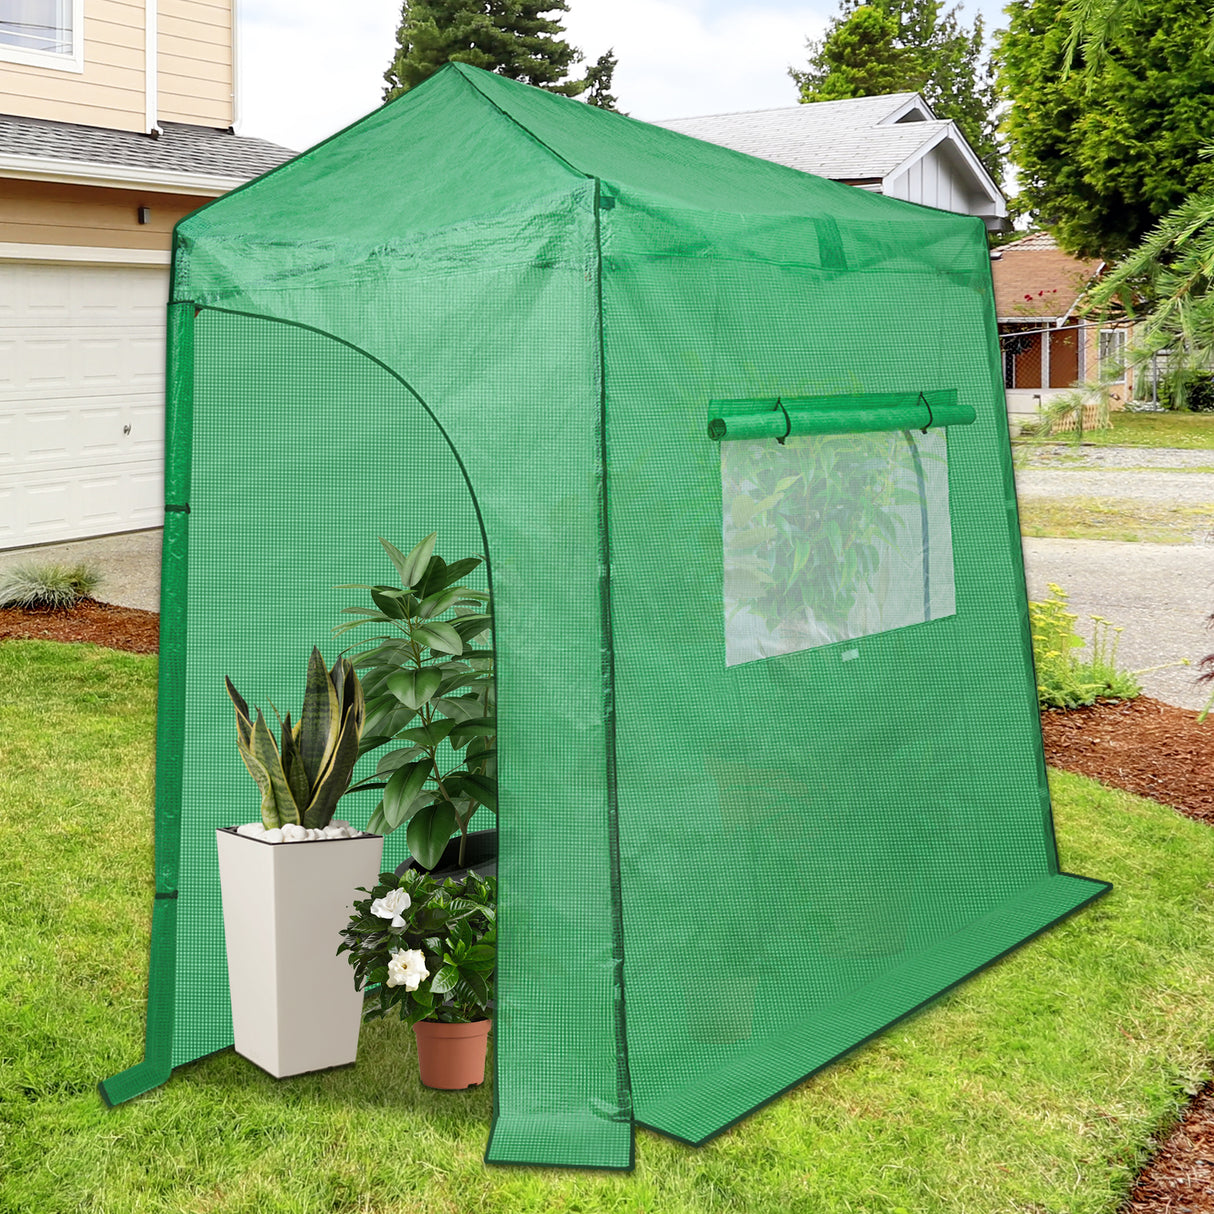 GH36-GRN-AZ-SP013 Replacement Greenhouse Cover